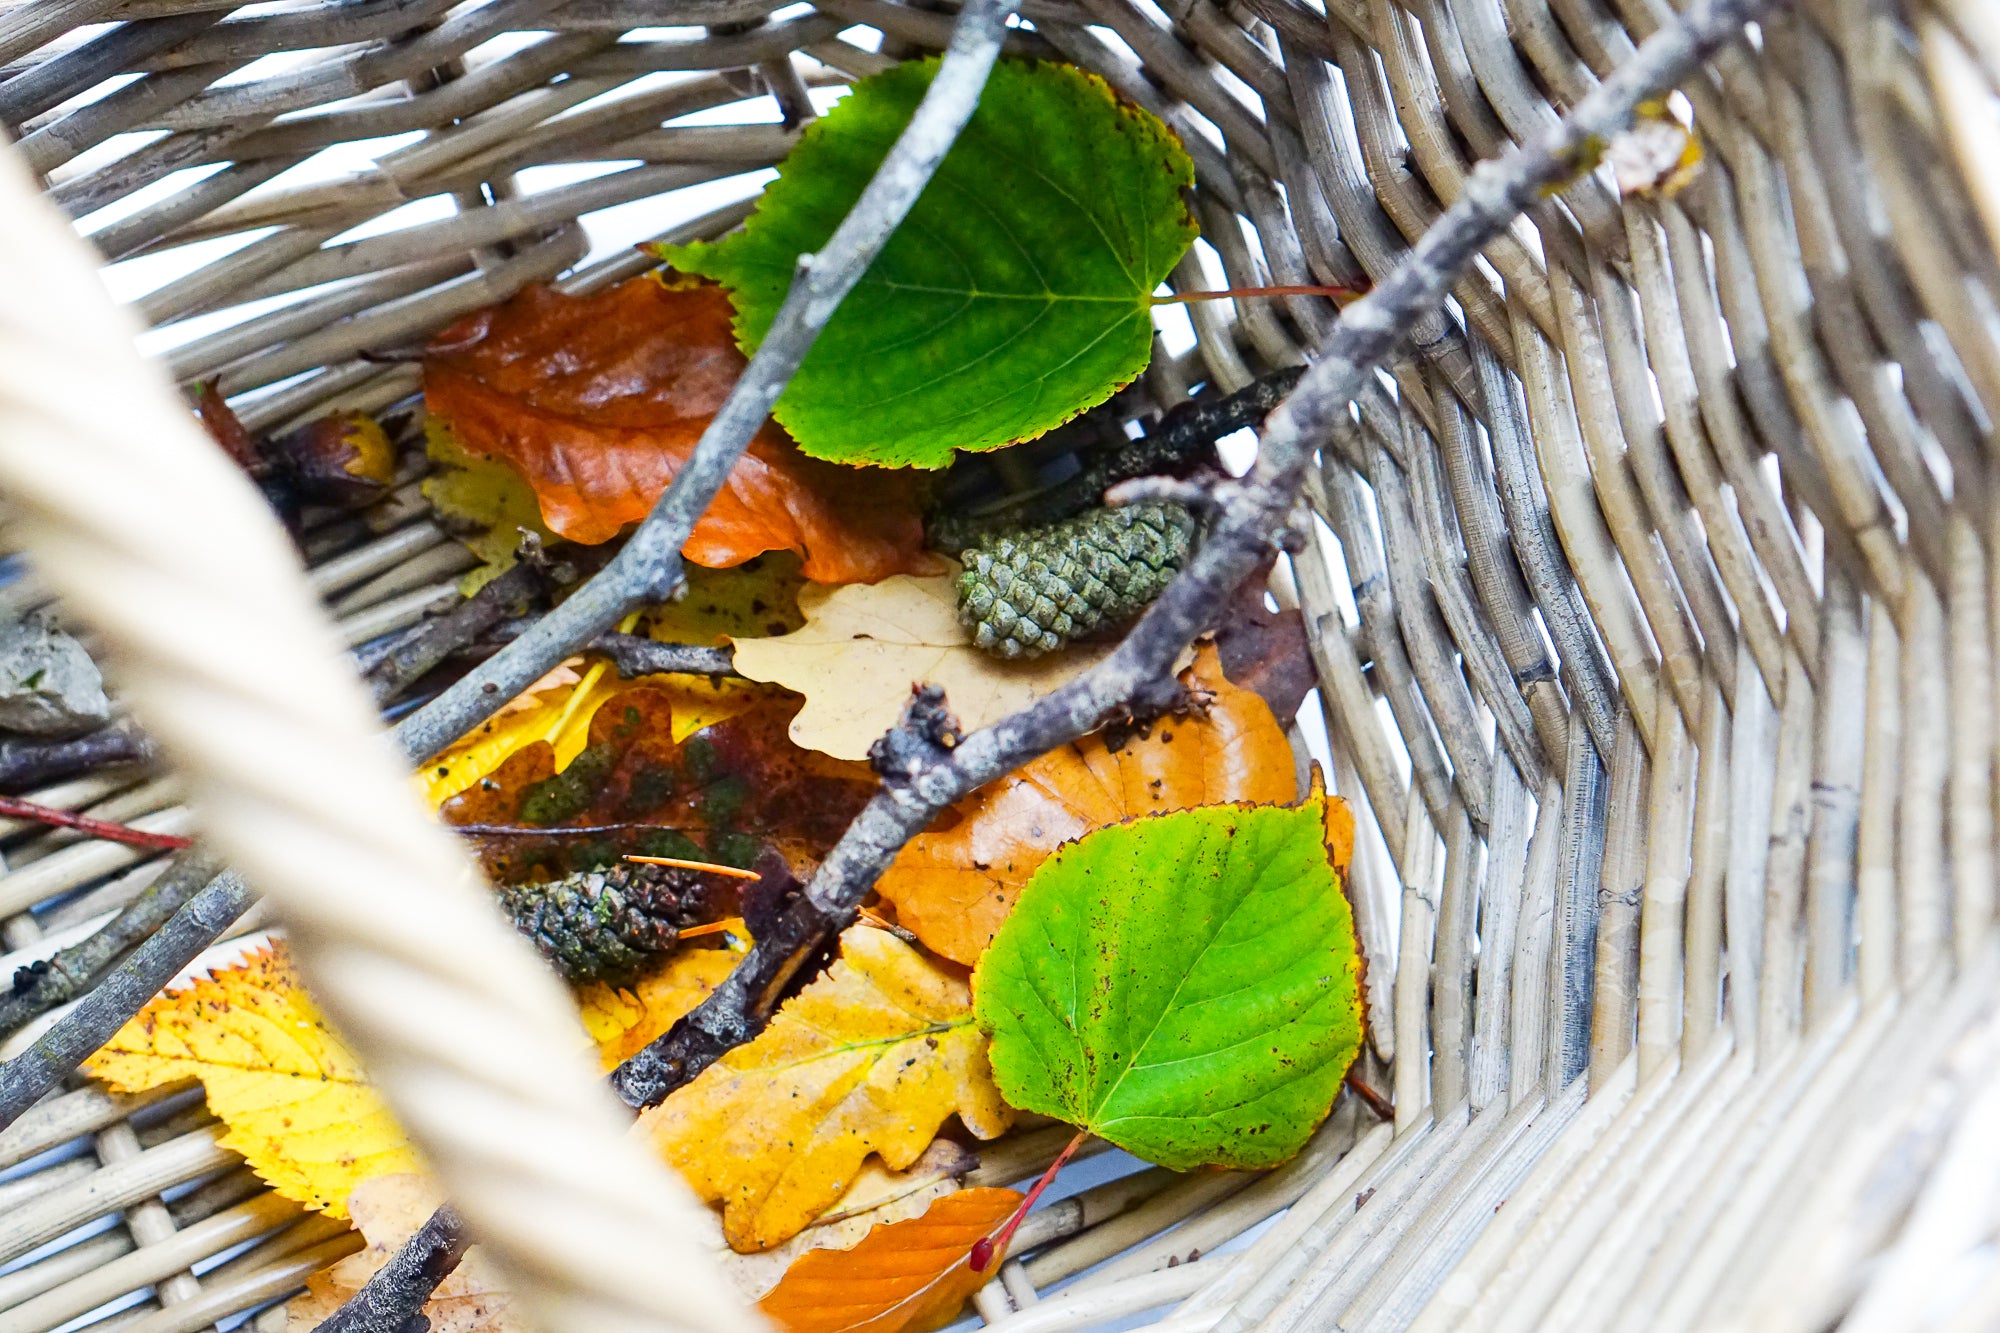 Set up an autumn nature and craft table to learn about the seasons